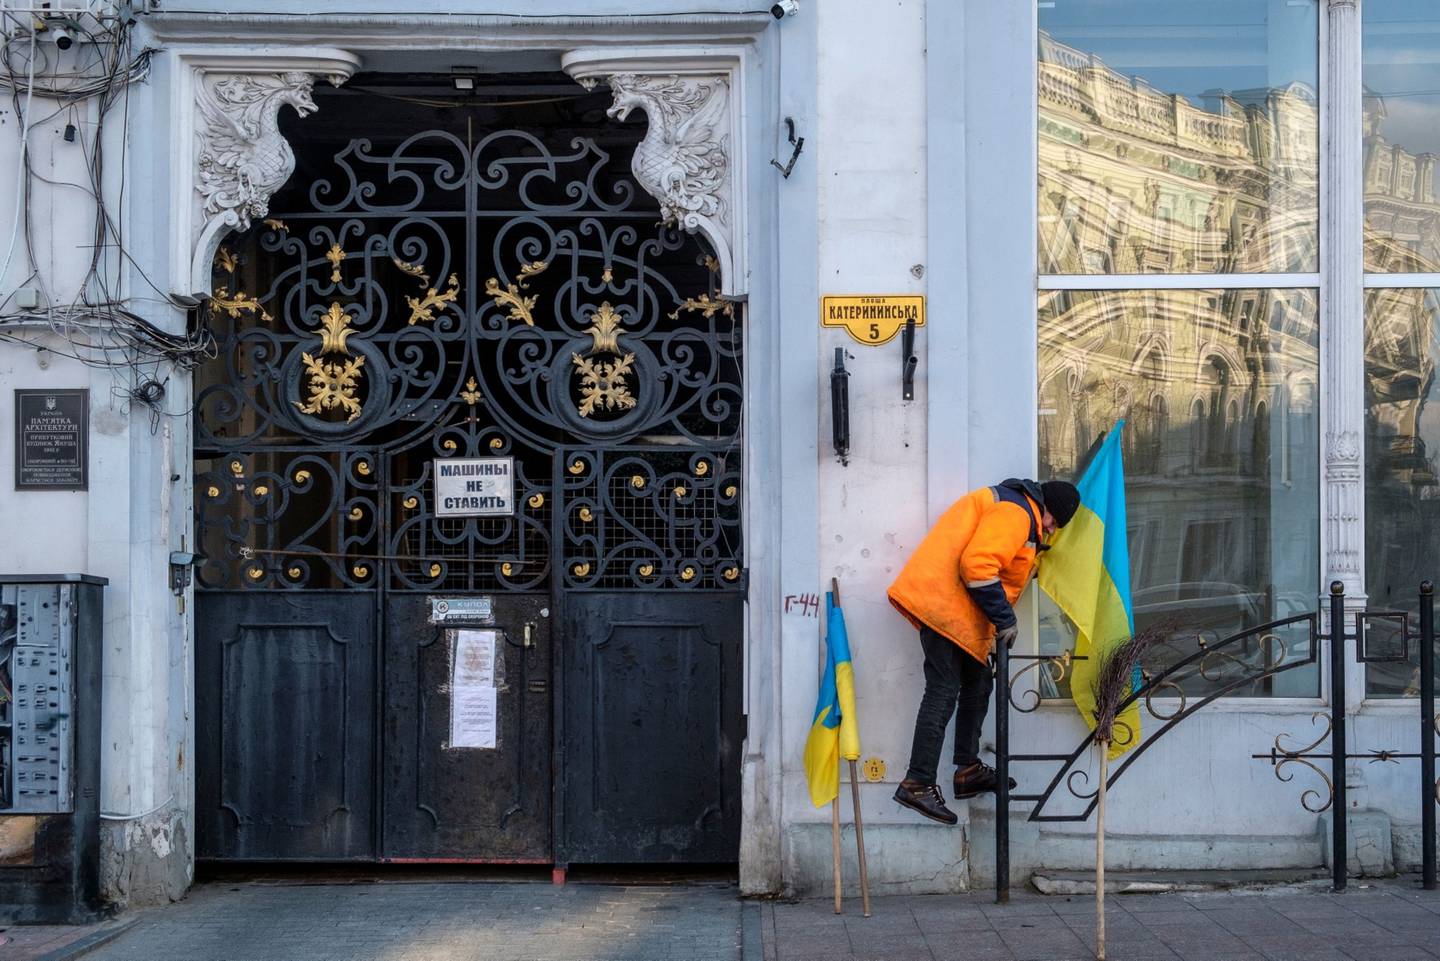 Ukrainian flags are installed outside a building in Odessa. The city's confidence extends to a belief that Ukraine could stop it falling into Russian hands.dfd